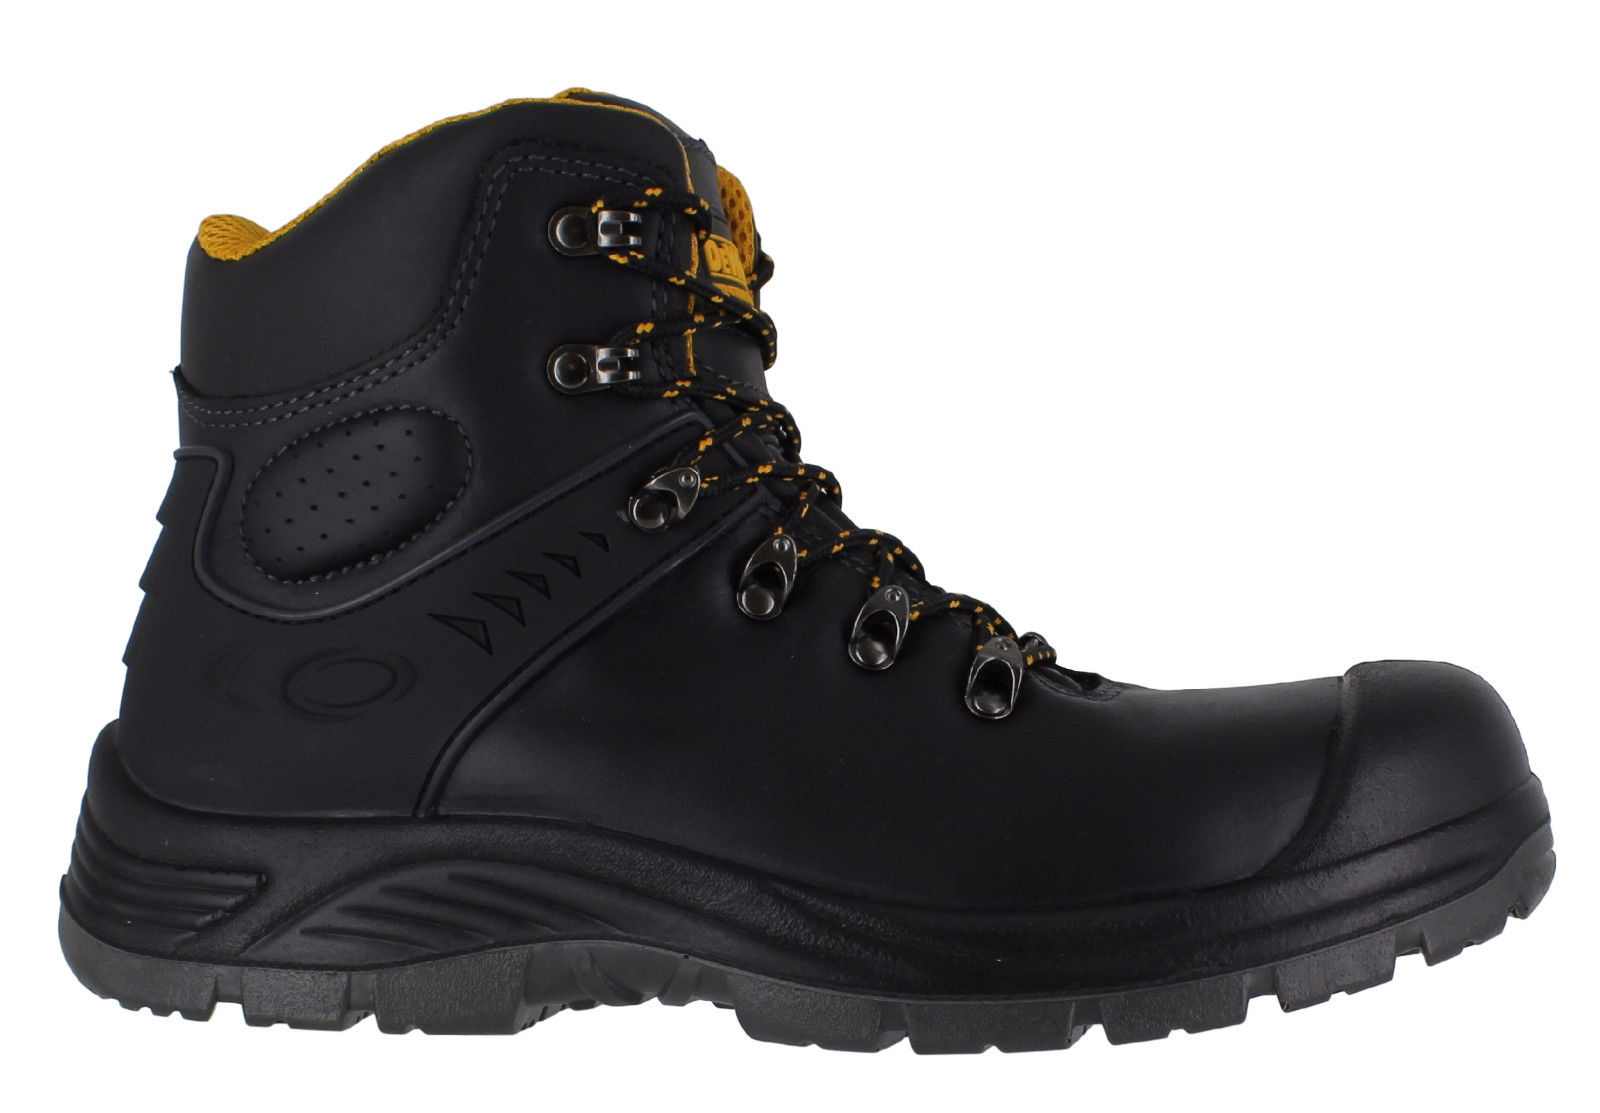 Safety Boots - Composite Toe/Midsole S3 